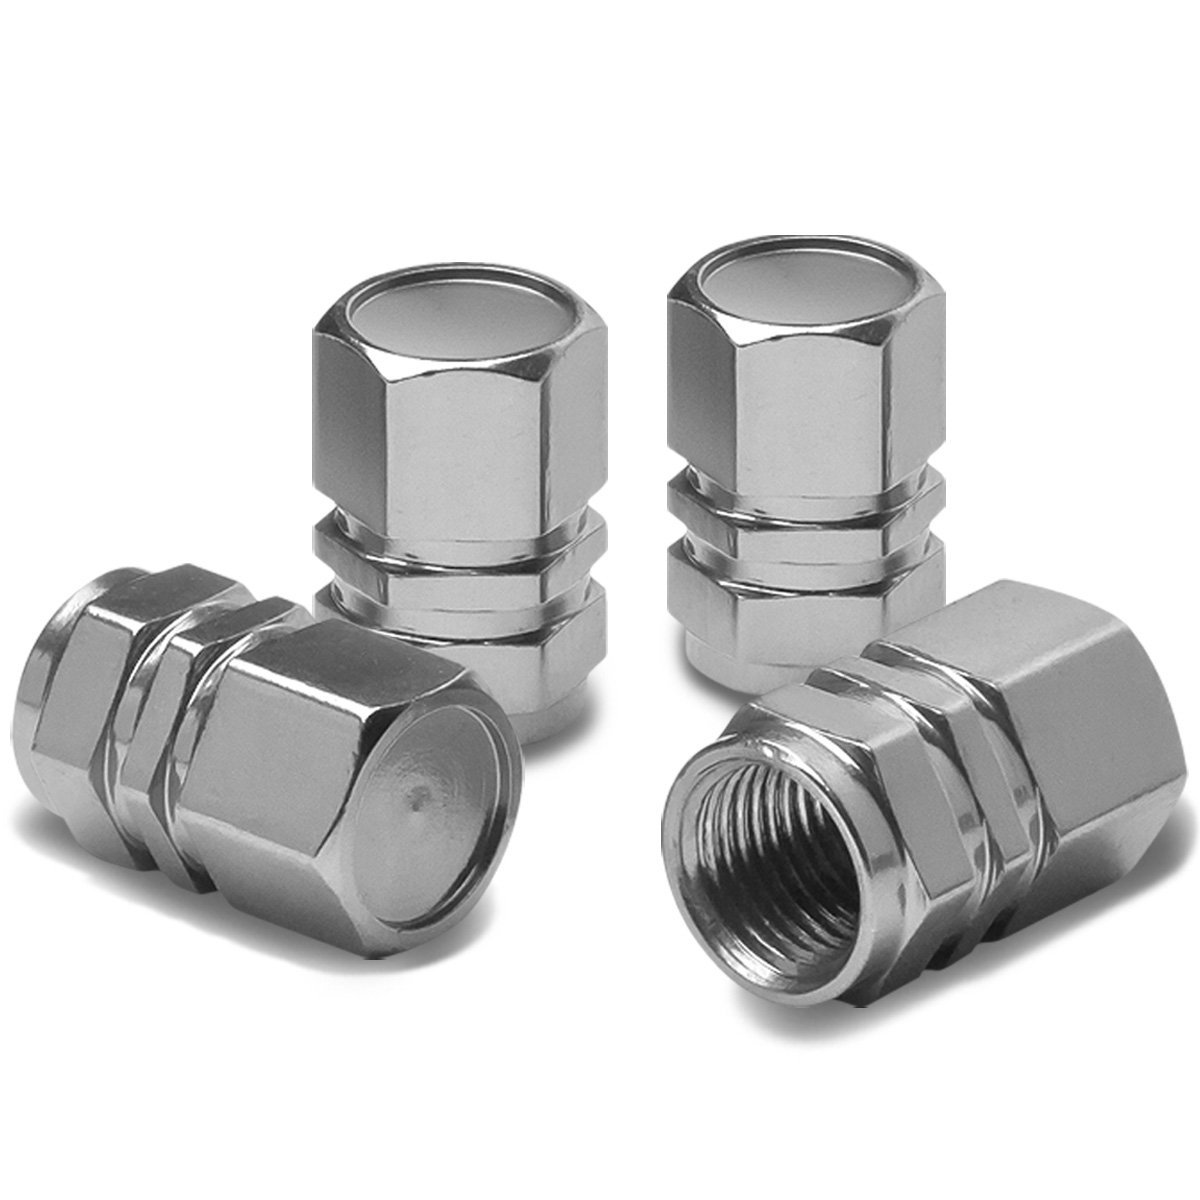 Hexagon Style Polished Aluminum Silver Chrome Tire Valve Stem Caps Pack of 4 